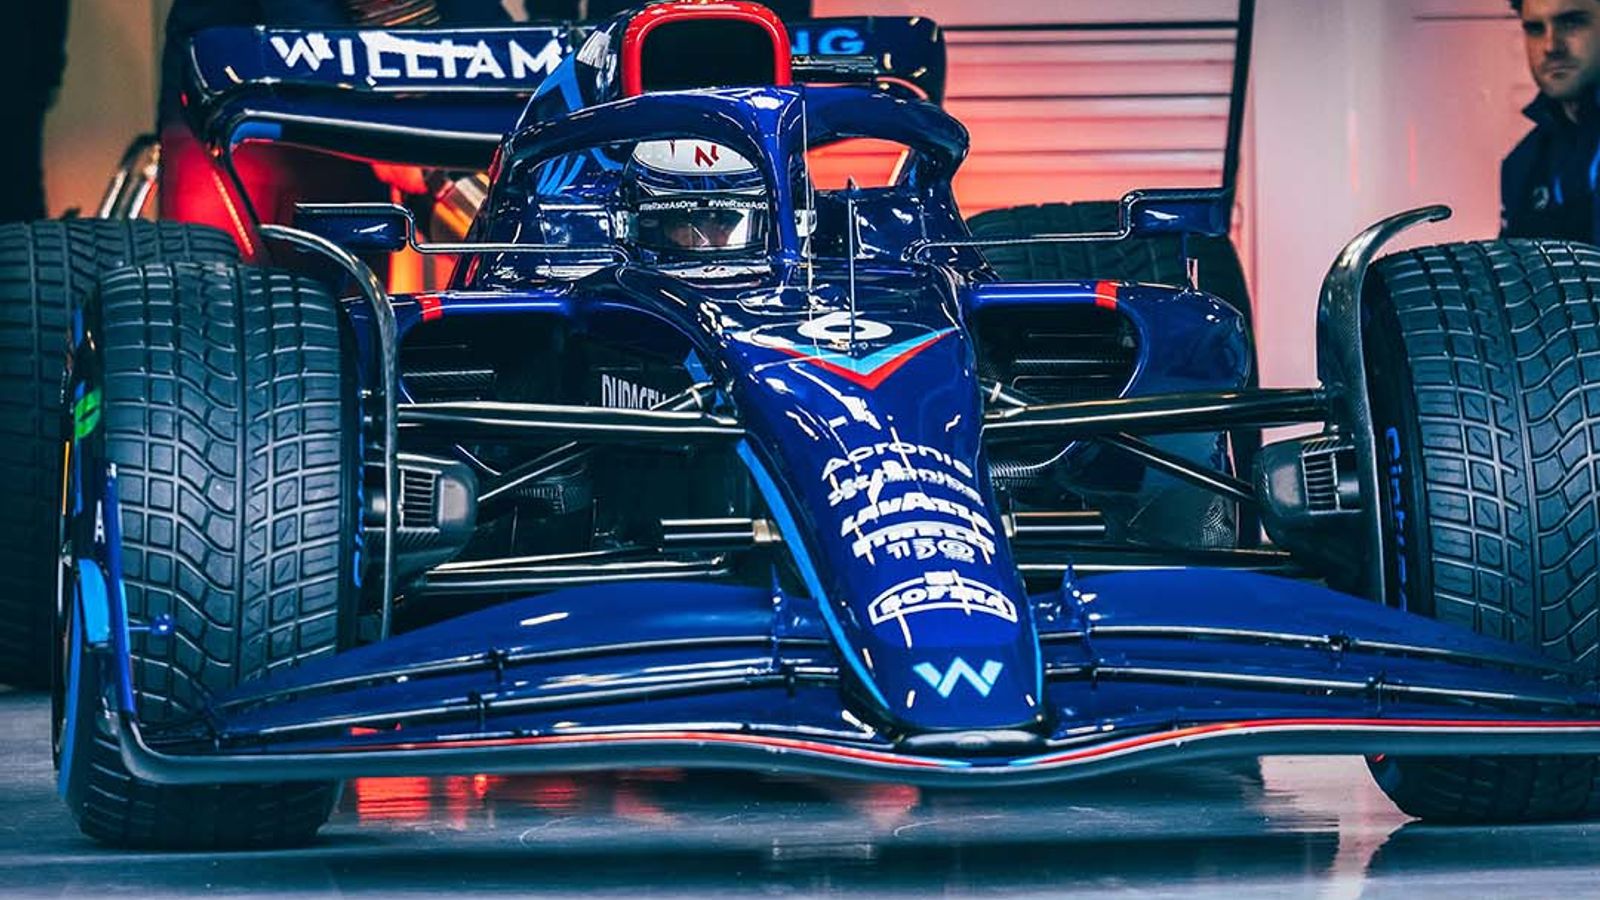 Williams launch Formula 1 2022 car: British team hit track with new look ahead of crucial season